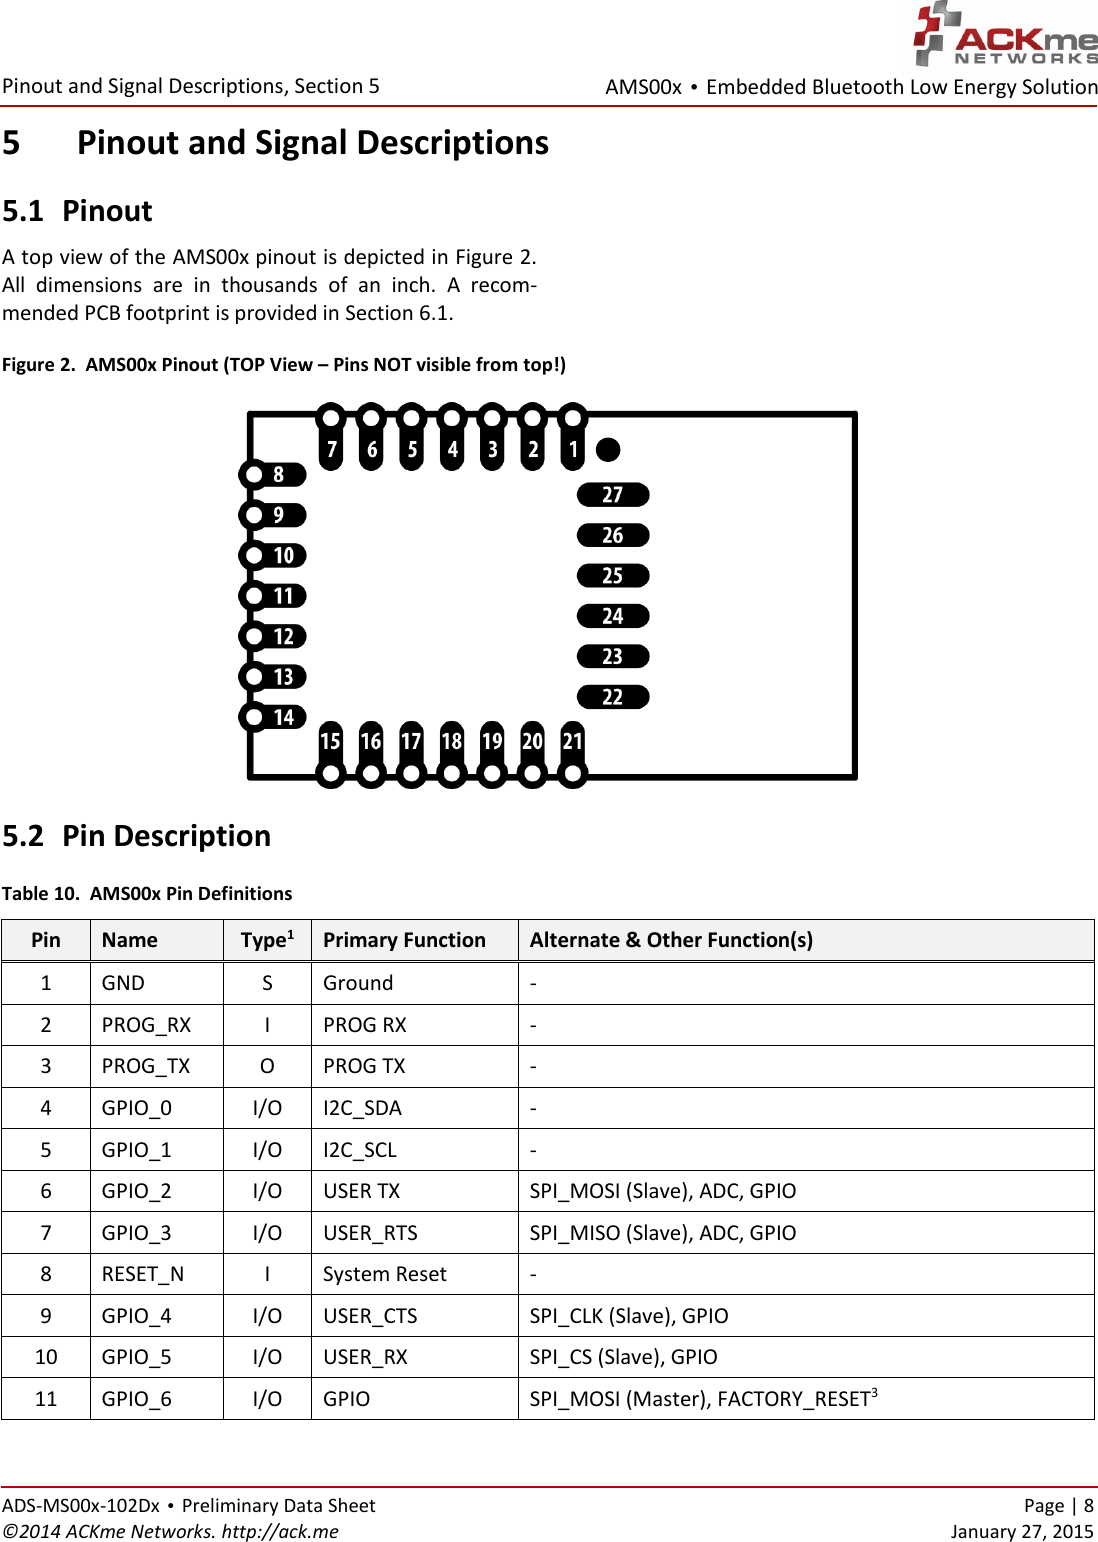 AMS00x • Embedded Bluetooth Low Energy Solution  Pinout and Signal Descriptions, Section 5 ADS-MS00x-102Dx • Preliminary Data Sheet    Page | 8 ©2014 ACKme Networks. http://ack.me    January 27, 2015 5 Pinout and Signal Descriptions 5.1 Pinout A top view of the AMS00x pinout is depicted in Figure 2. All  dimensions  are  in  thousands  of  an  inch.  A  recom-mended PCB footprint is provided in Section 6.1. Figure 2.  AMS00x Pinout (TOP View – Pins NOT visible from top!)  5.2 Pin Description Table 10.  AMS00x Pin Definitions Pin Name Type1 Primary Function  Alternate &amp; Other Function(s) 1 GND S Ground - 2 PROG_RX I PROG RX - 3 PROG_TX O PROG TX - 4 GPIO_0 I/O I2C_SDA - 5 GPIO_1 I/O I2C_SCL - 6 GPIO_2  I/O USER TX SPI_MOSI (Slave), ADC, GPIO 7 GPIO_3 I/O USER_RTS SPI_MISO (Slave), ADC, GPIO 8 RESET_N I System Reset - 9 GPIO_4 I/O USER_CTS SPI_CLK (Slave), GPIO 10 GPIO_5 I/O USER_RX SPI_CS (Slave), GPIO 11 GPIO_6 I/O GPIO SPI_MOSI (Master), FACTORY_RESET3 